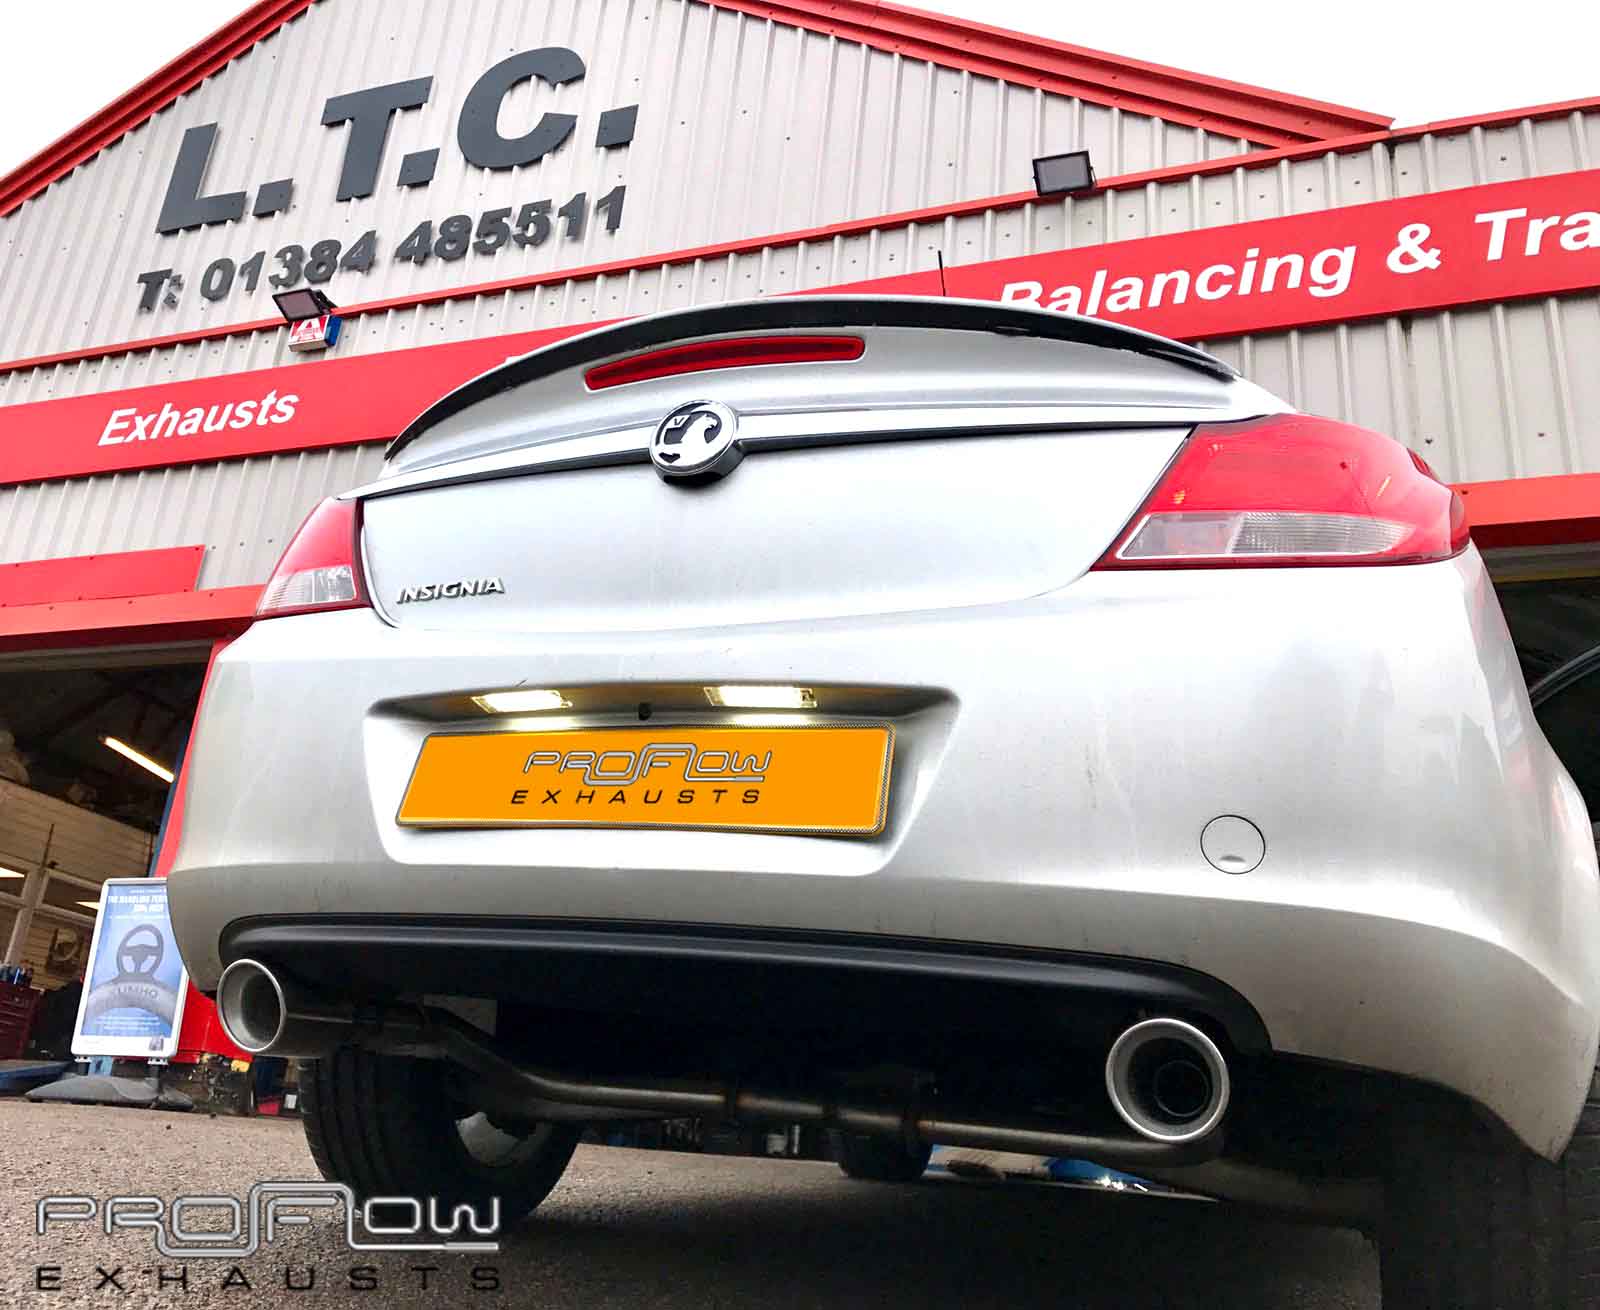 Proflow Exhausts Vauxhall Insignia Middle And Dual Rear Stainless Steel Exhaust System (1)